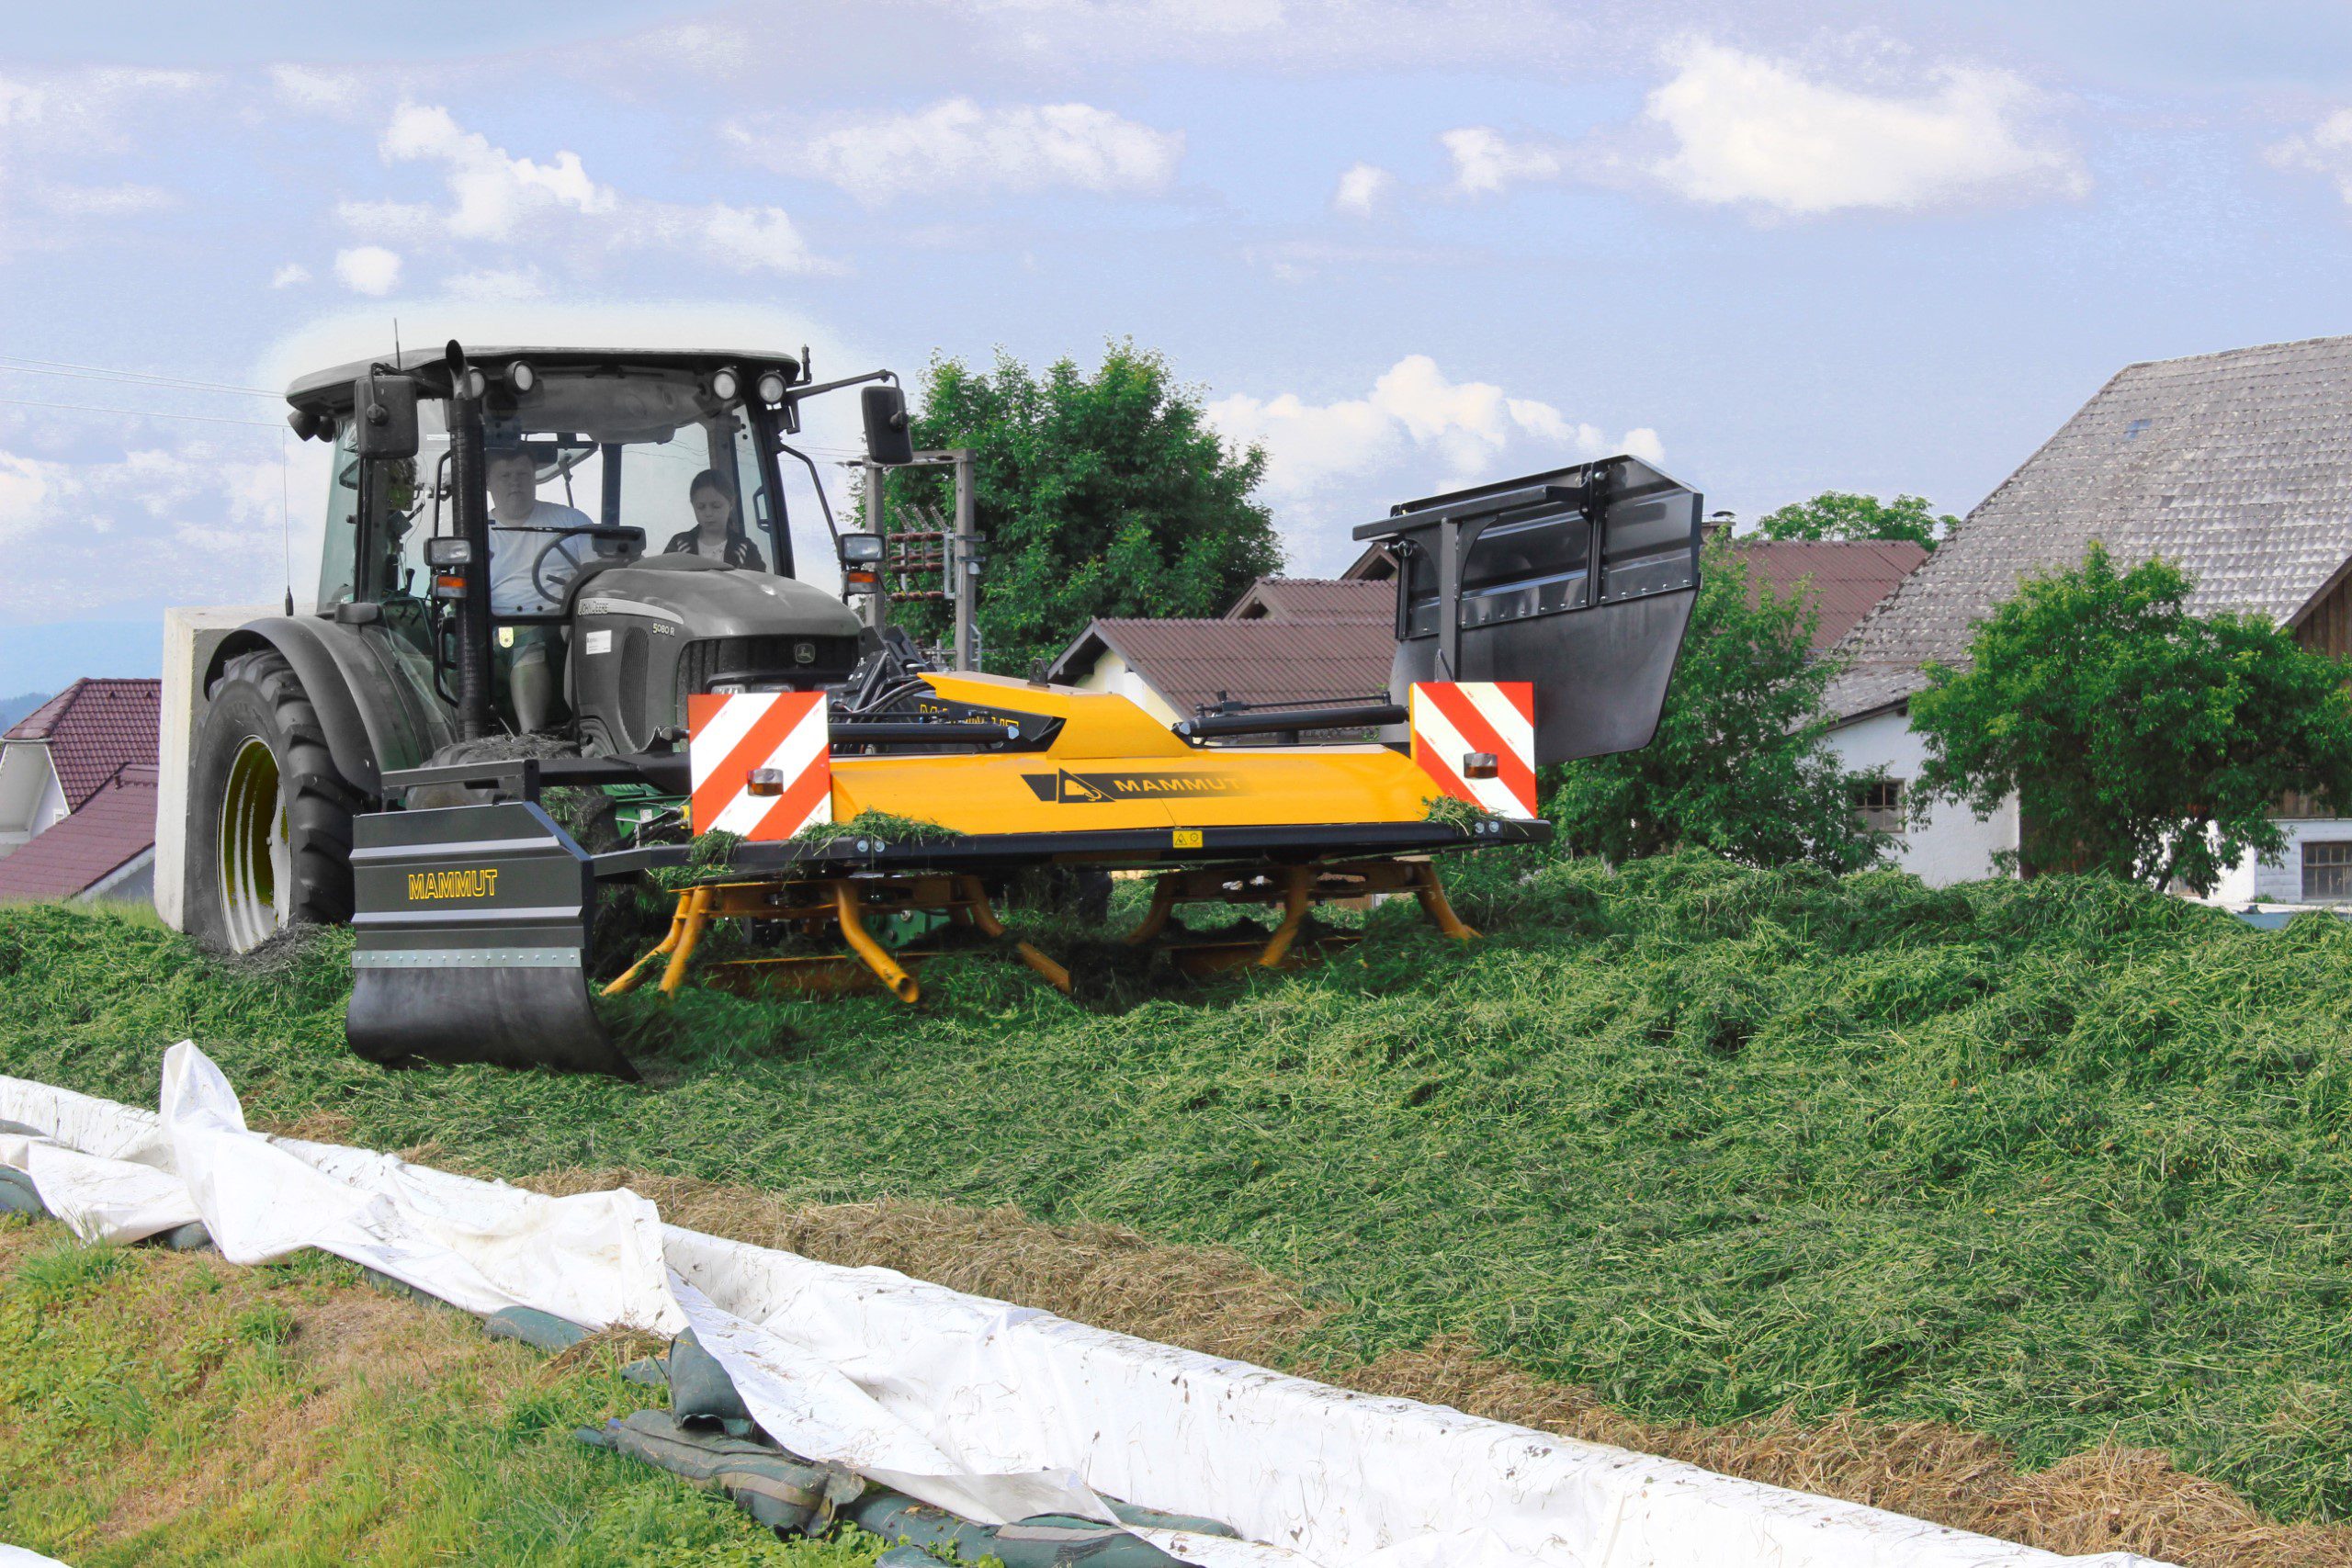 Rotary silage spreaders – now it's all about width